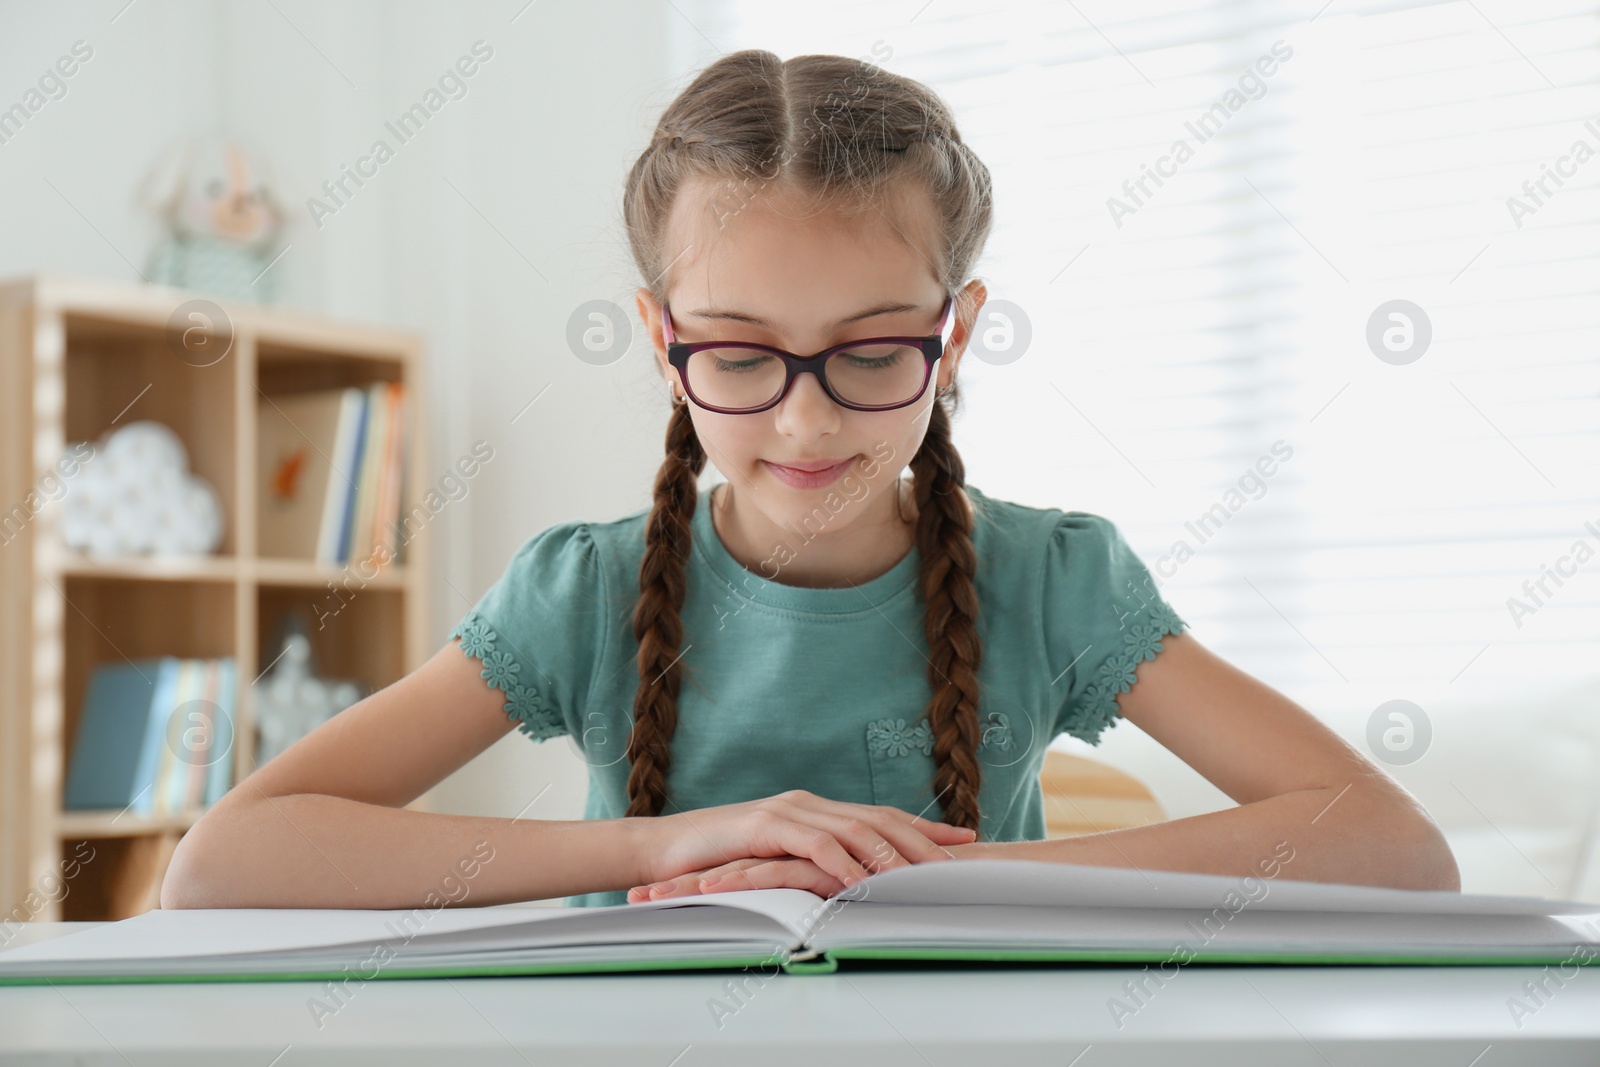 Photo of Cute little girl reading book at desk in room